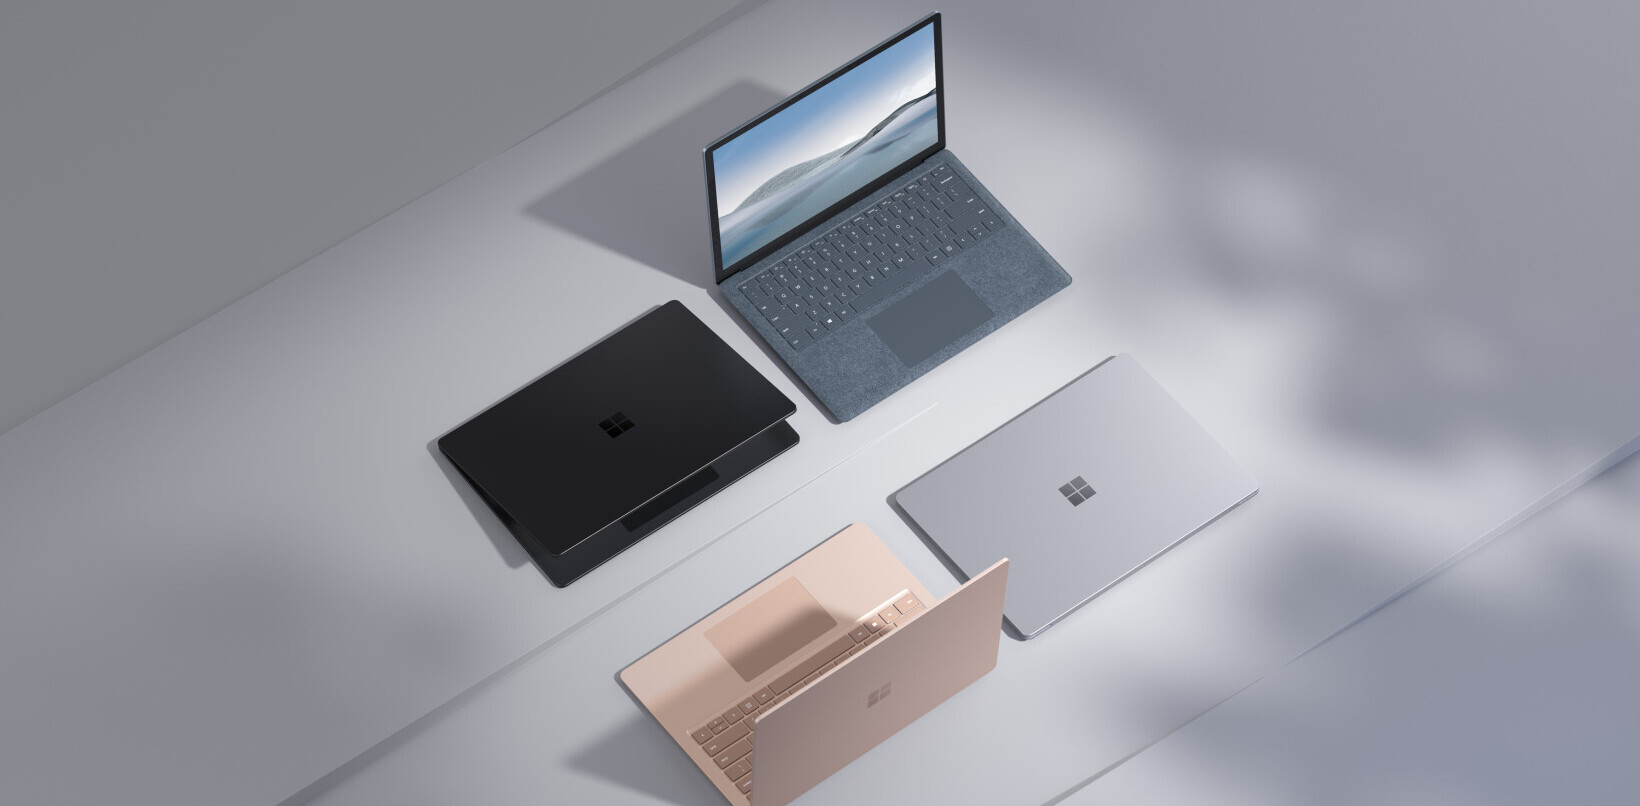 Microsoft launches Surface Laptop 4 with your pick between Intel and AMD